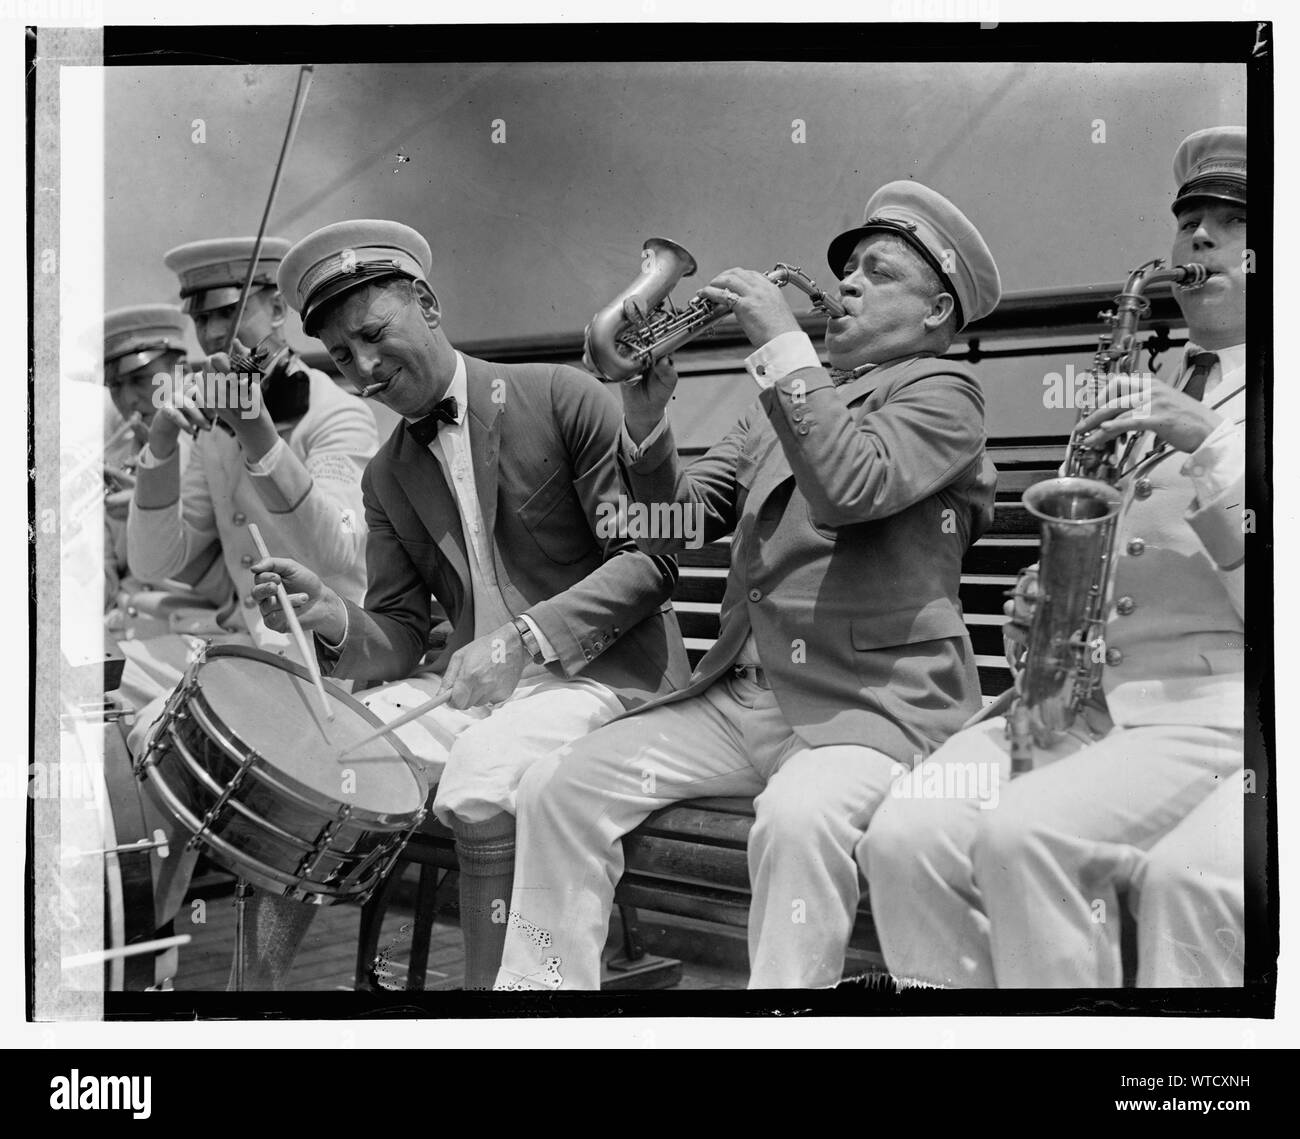 Military band members playing instruments Stock Photo